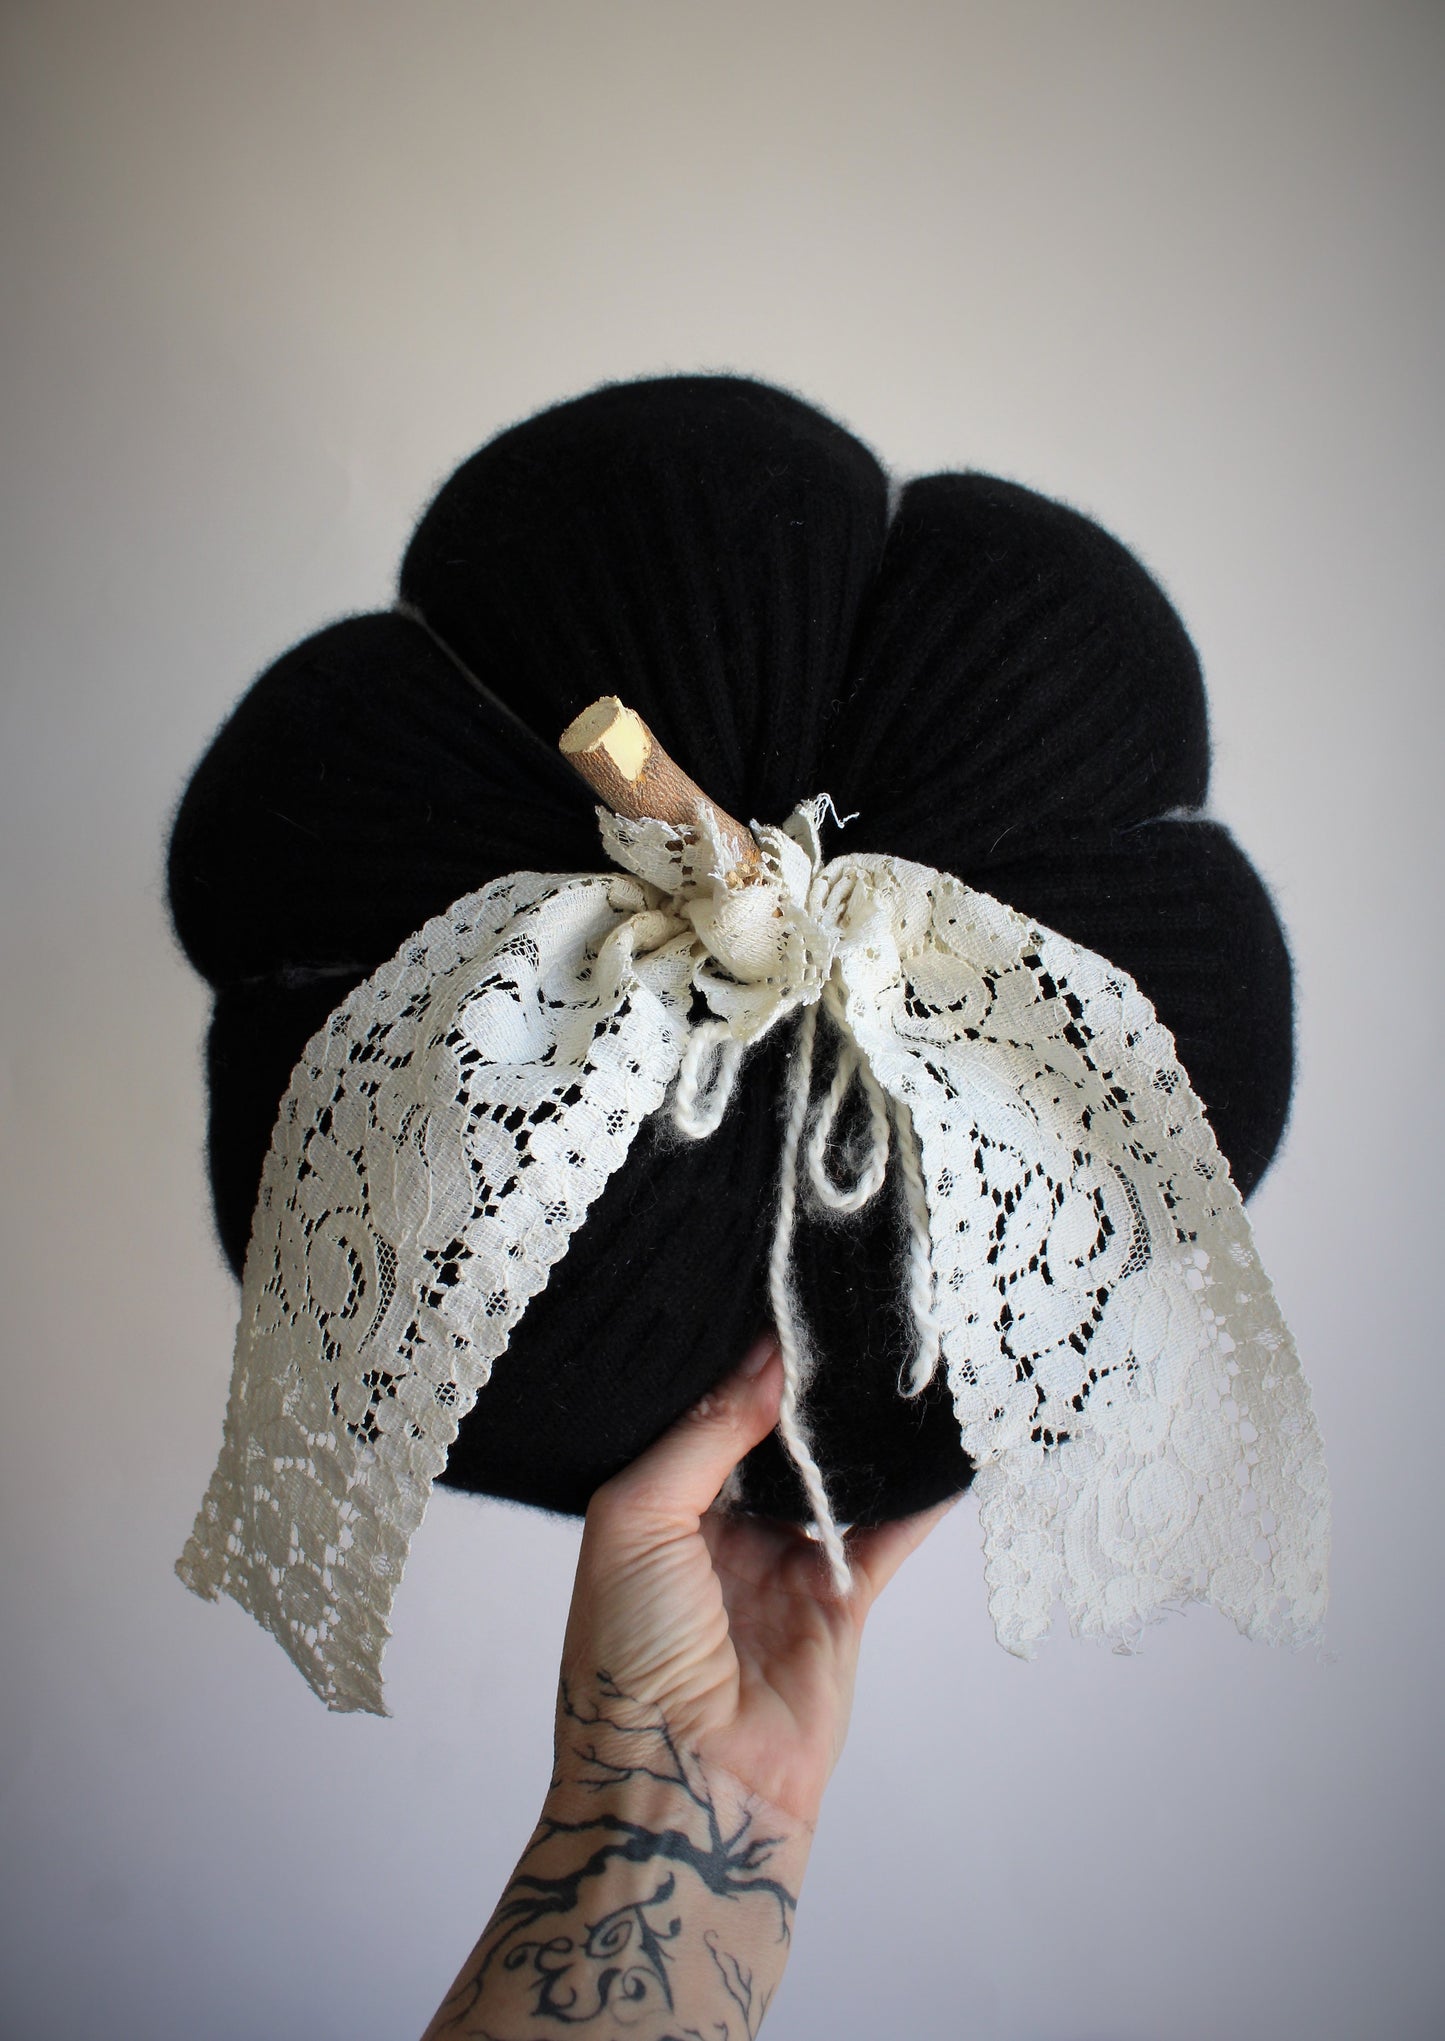 Extra Large Black Knit Pumpkin Pillow Pouf, With Black and Ivory Lace and Wooden Stem